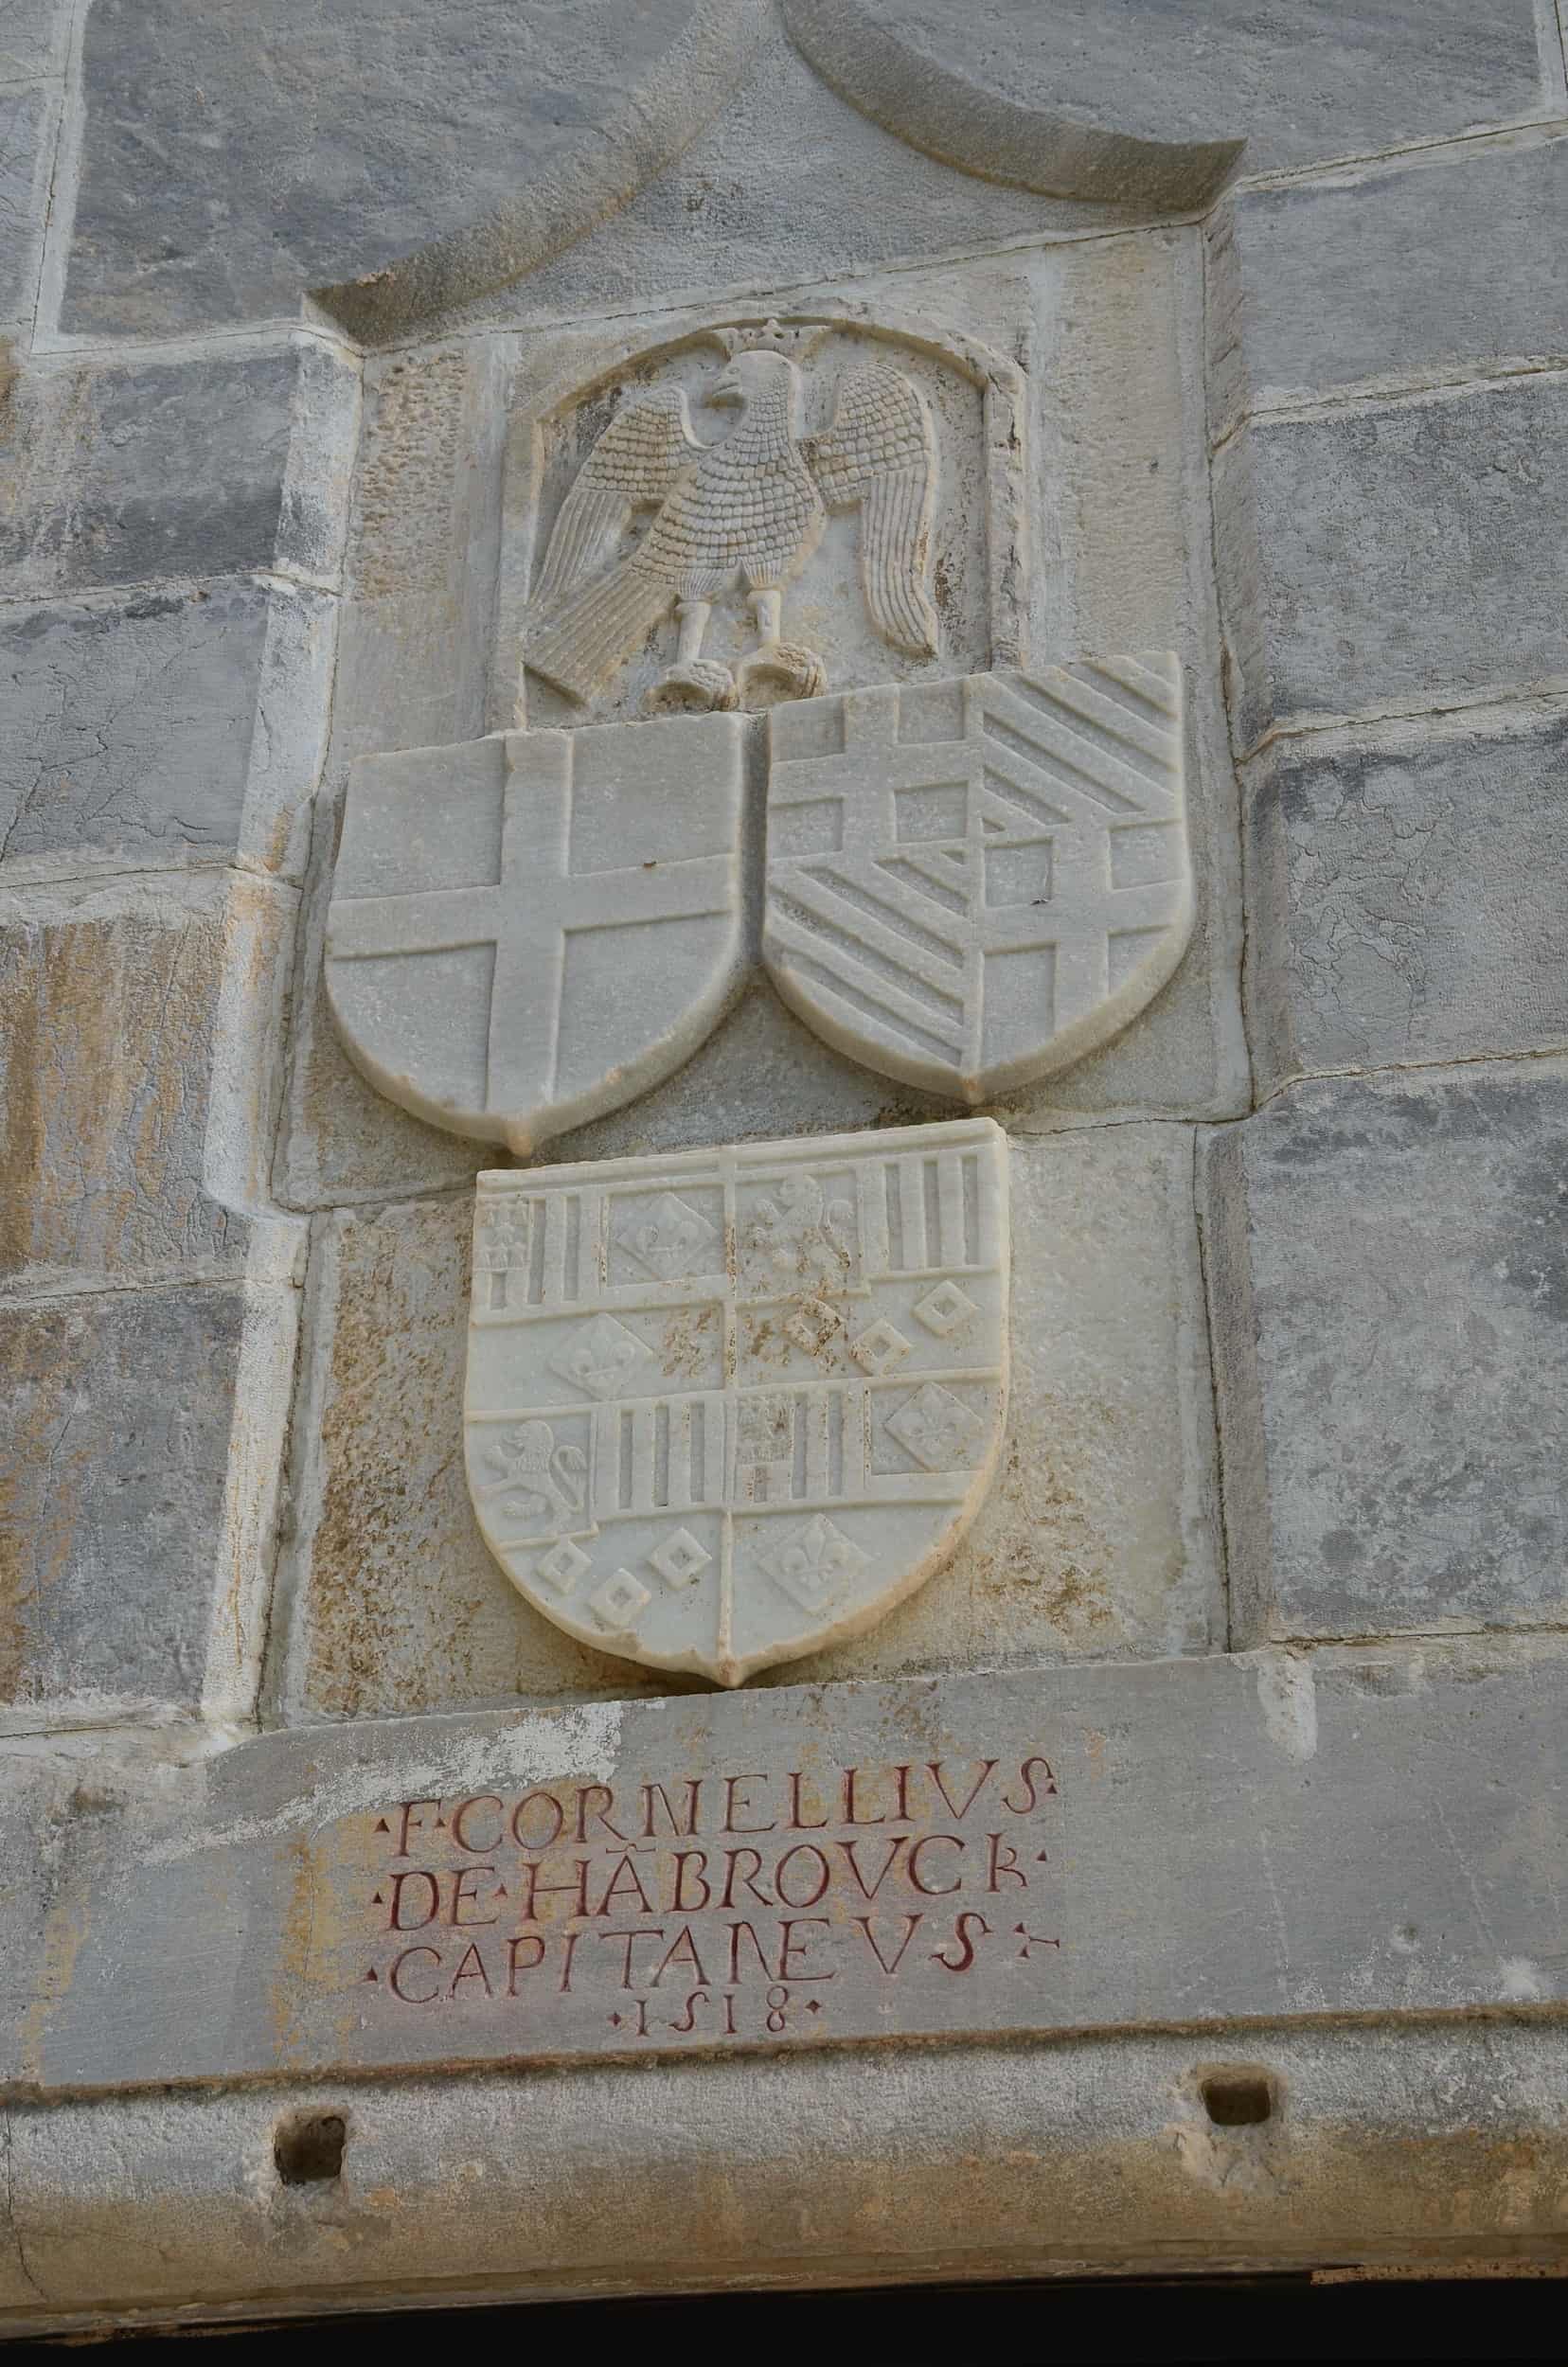 Coats of arms of the Order of the Knights of Saint John merged with that of Fabrizio del Carretto (top left); the Order of the Knights of Saint John (top right); and castle commanders Cornelius Hambroeck and Wallaim Berges (bottom)